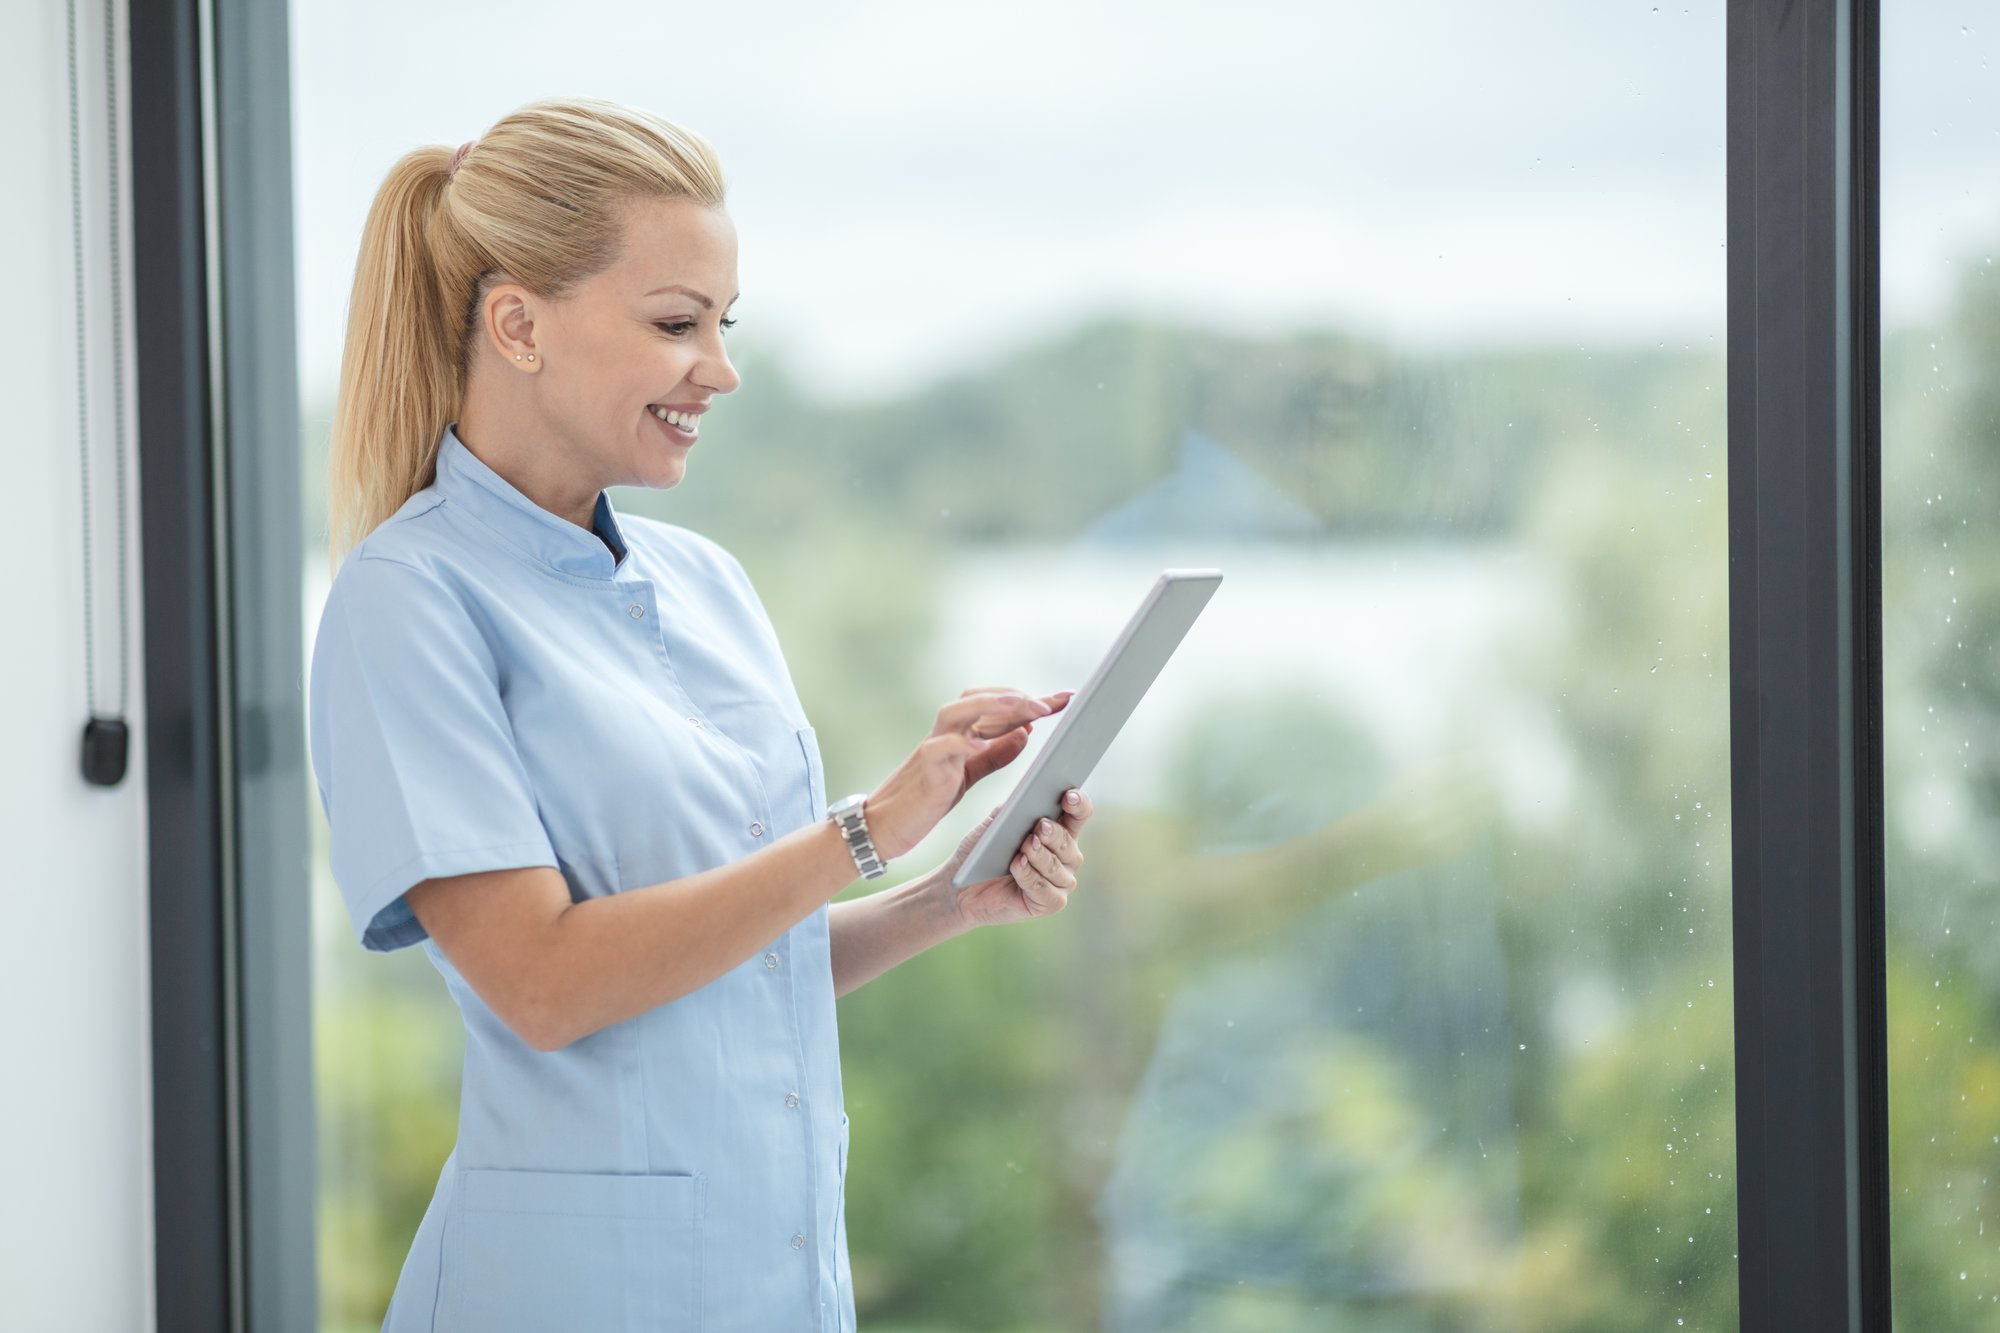 Are You Considering a Career as a Women's Health Nurse Practitioner?